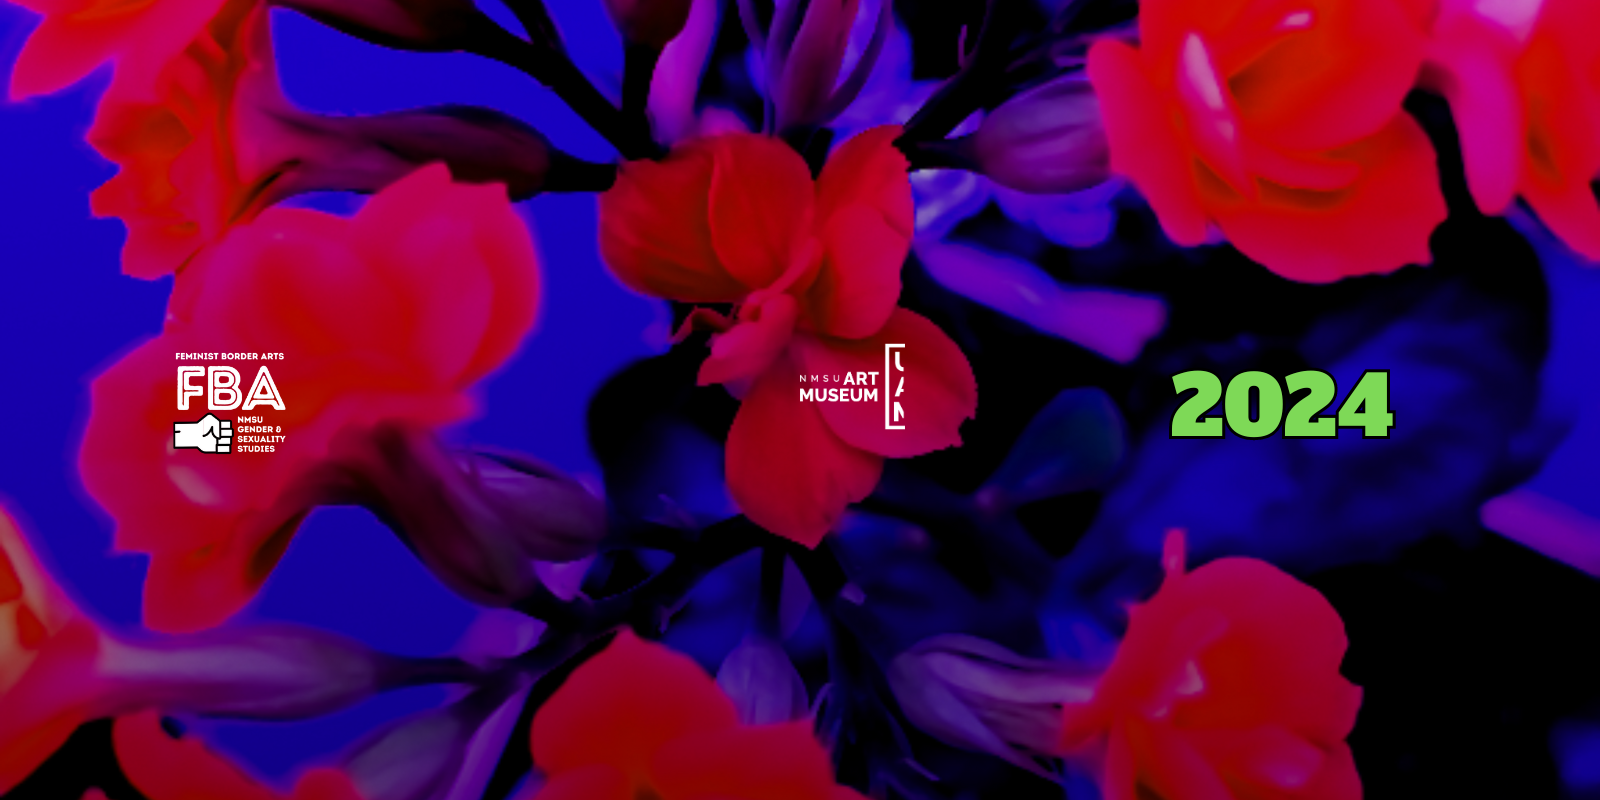 Abstract image of flowers for FBA 2024 festival